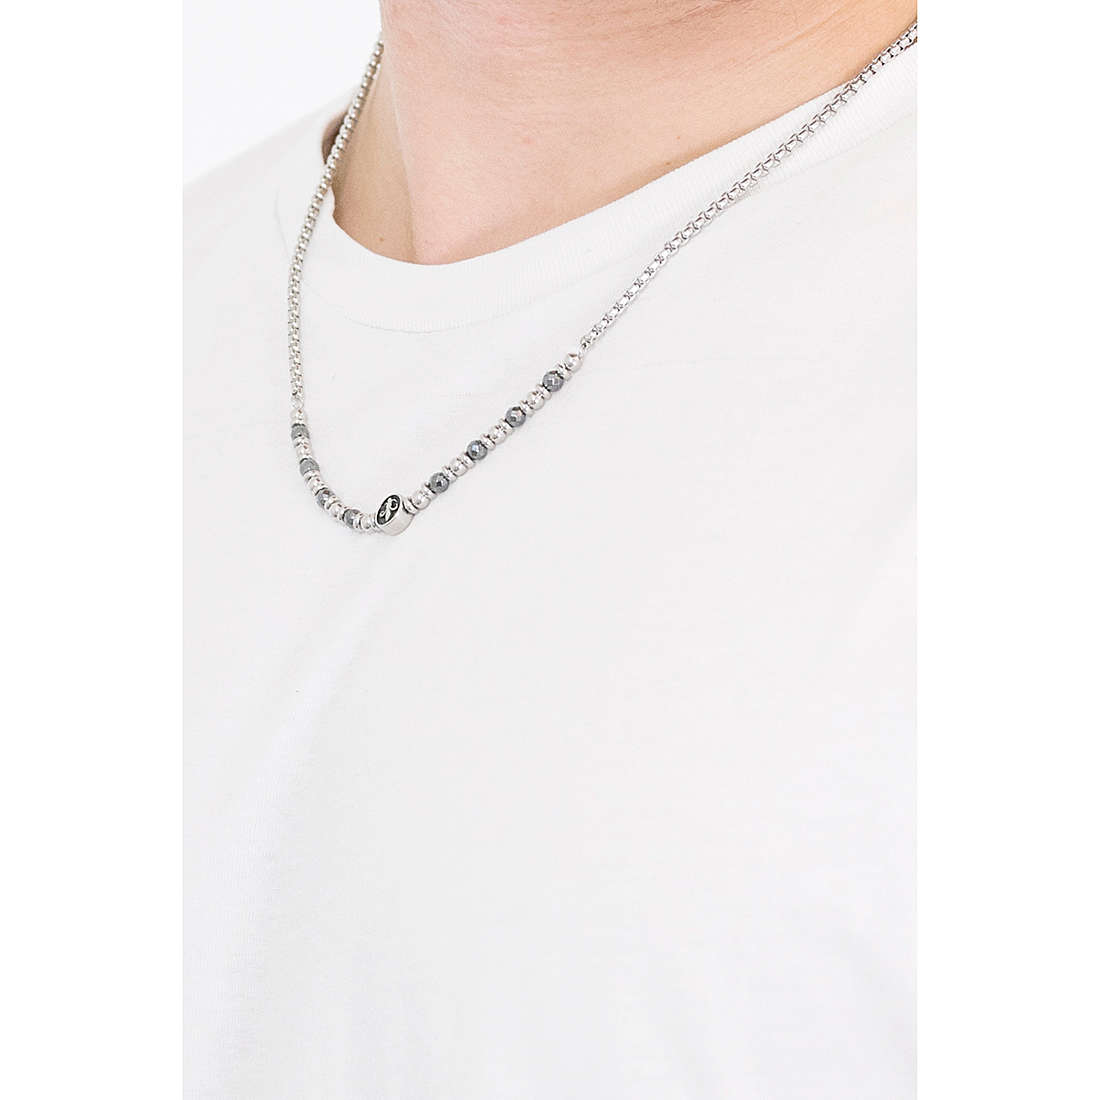 4US Cesare Paciotti necklaces Lily man 4UCL3331 wearing